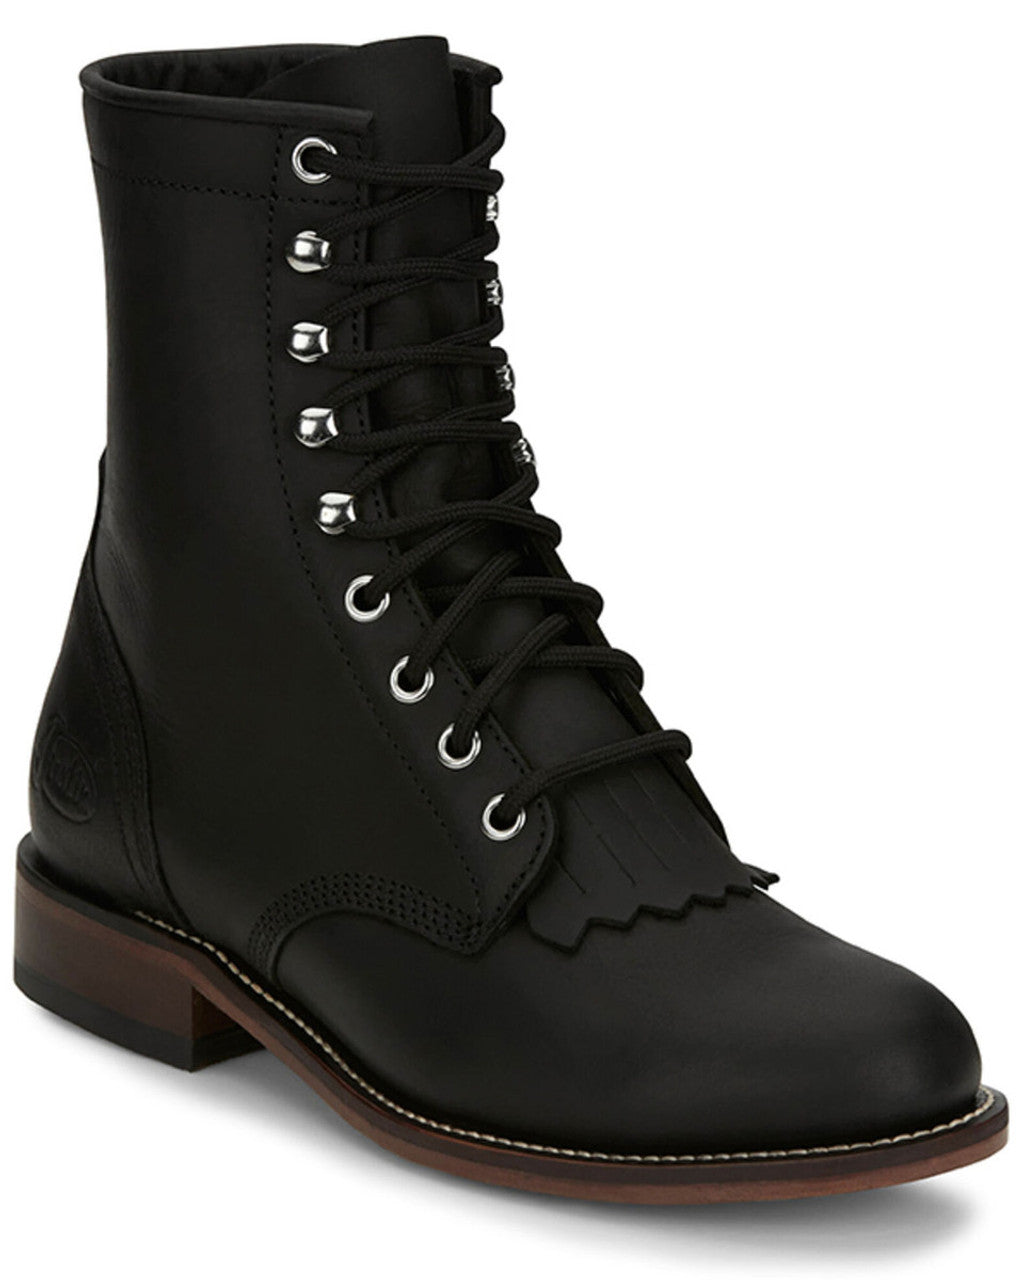 Justin Women's Black Lace Up Roper STYLE RP535